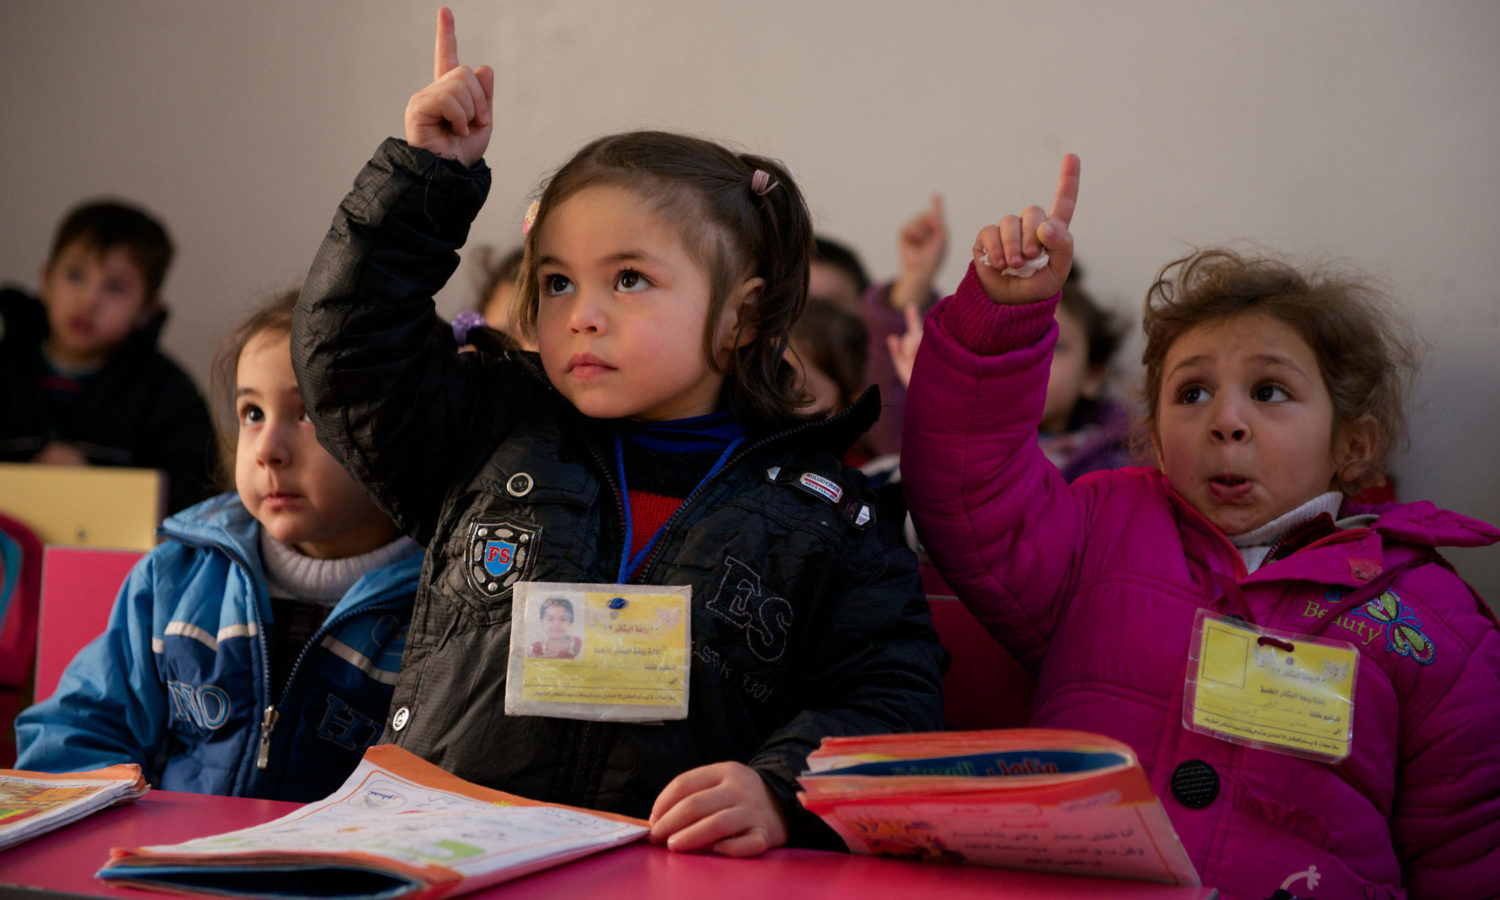 Eager to respond to their teacher, children raise their hands during an Arabic lesson at a kindergarten in Homs, Syria. © UNICEF/UNI156479/Noorani